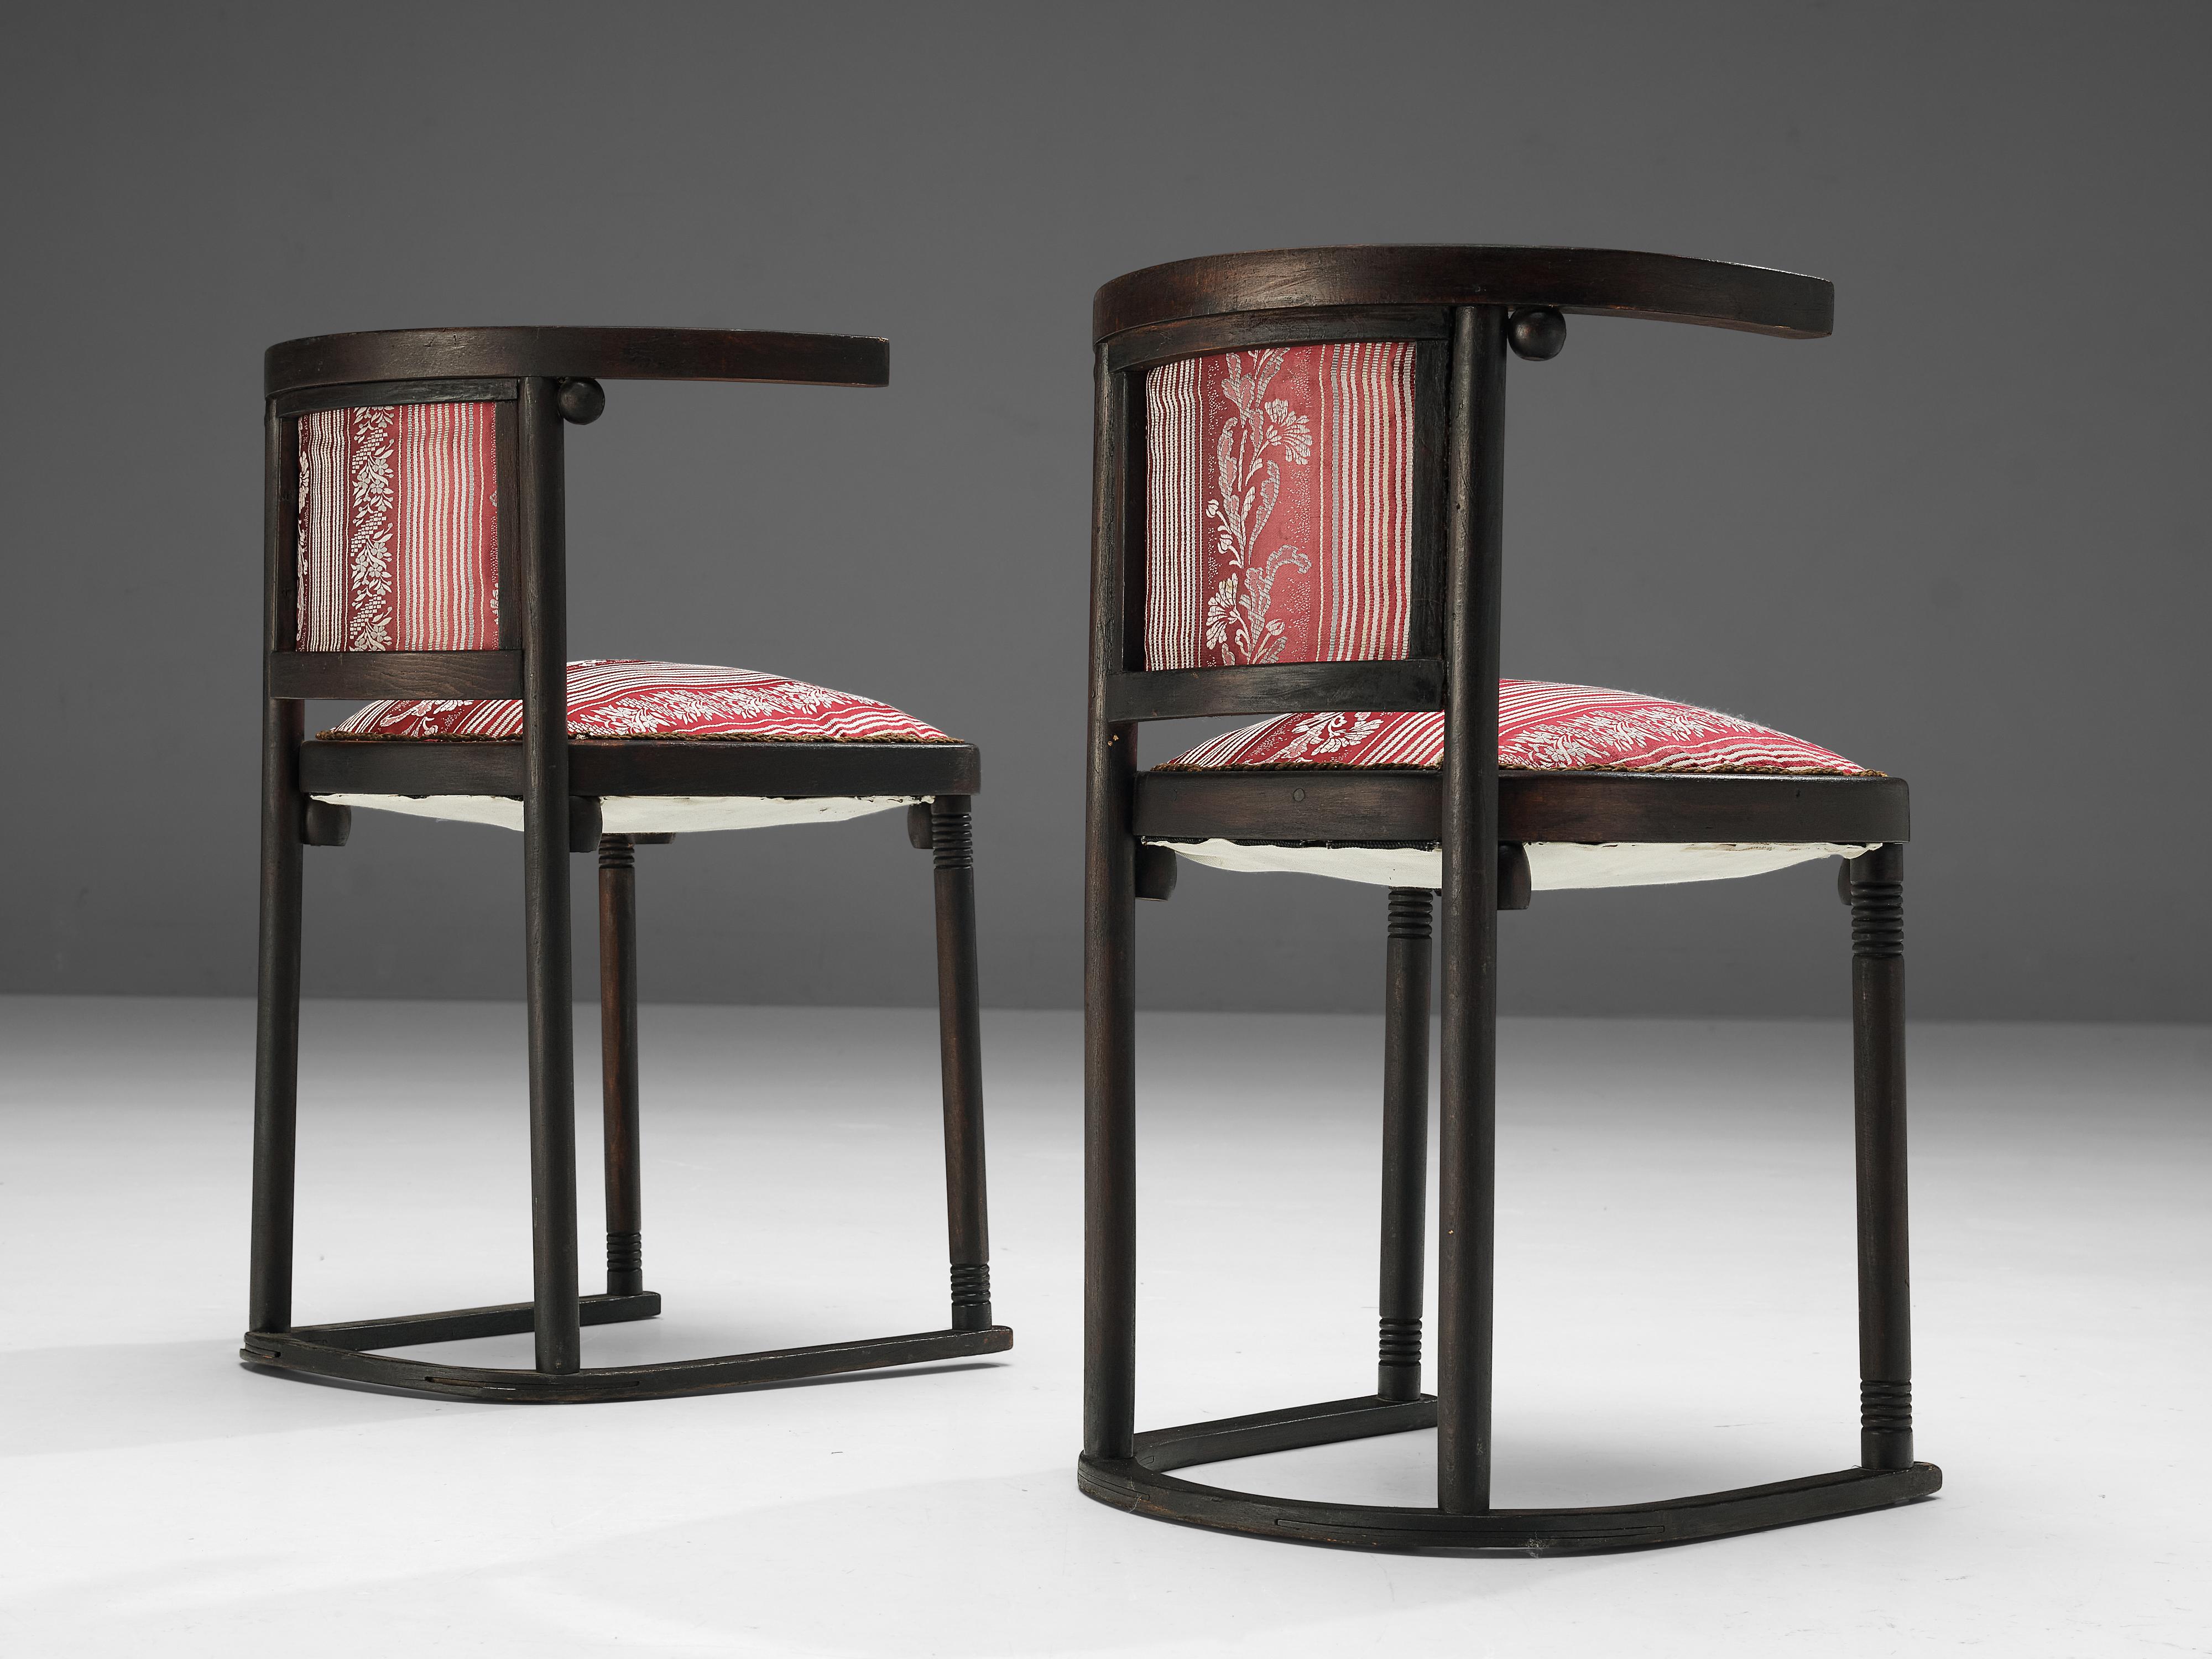 Fabric Josef Hoffmann ‘Fledermaus’ Dining Chairs in Floral Upholstery